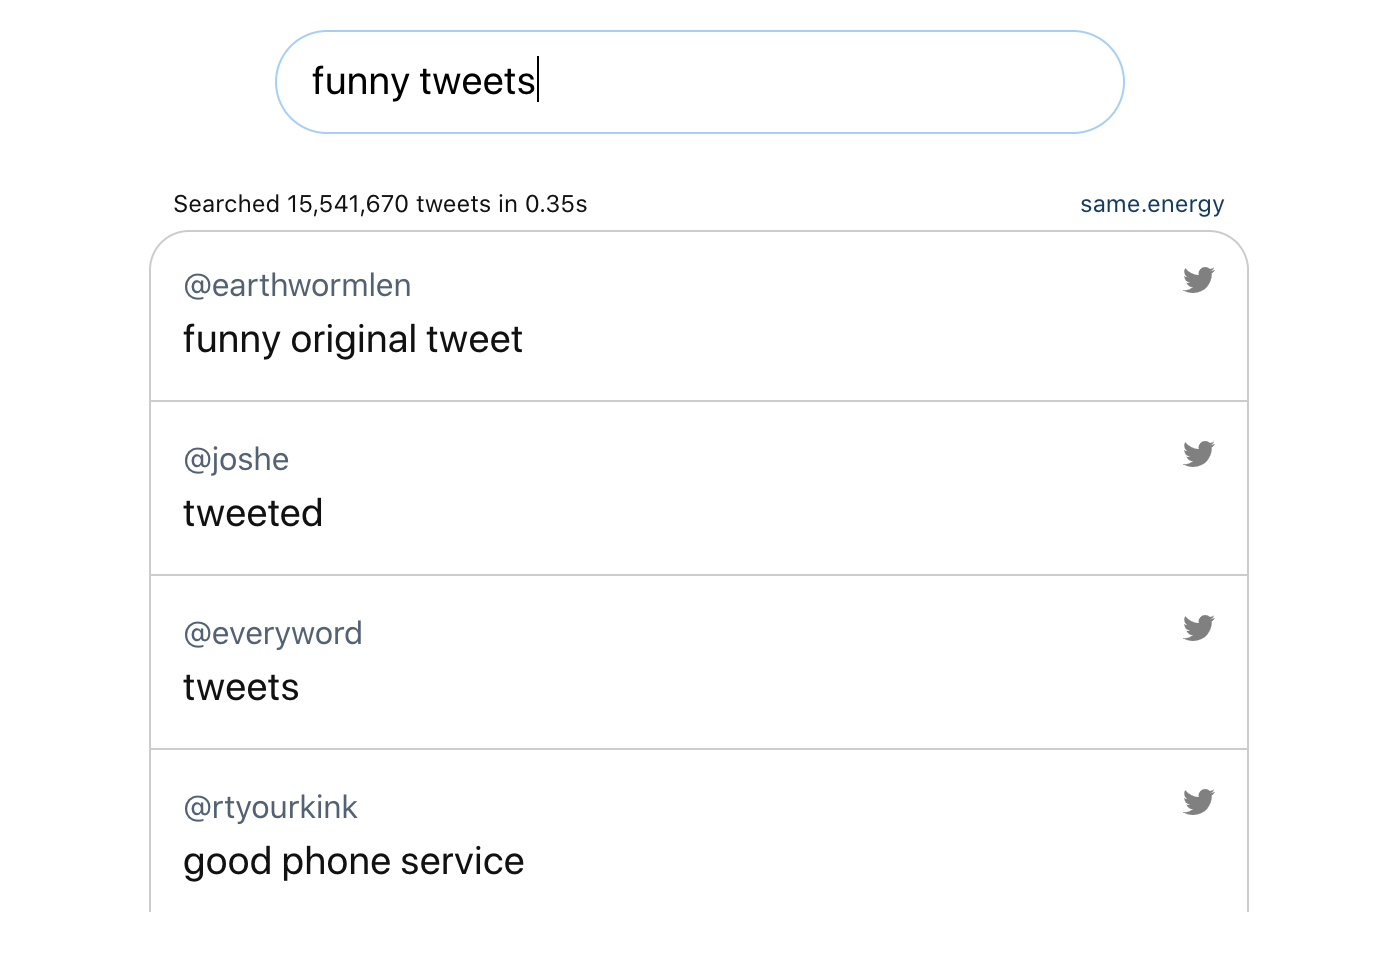 The top results are 'funny original tweet' and 'tweeted'.